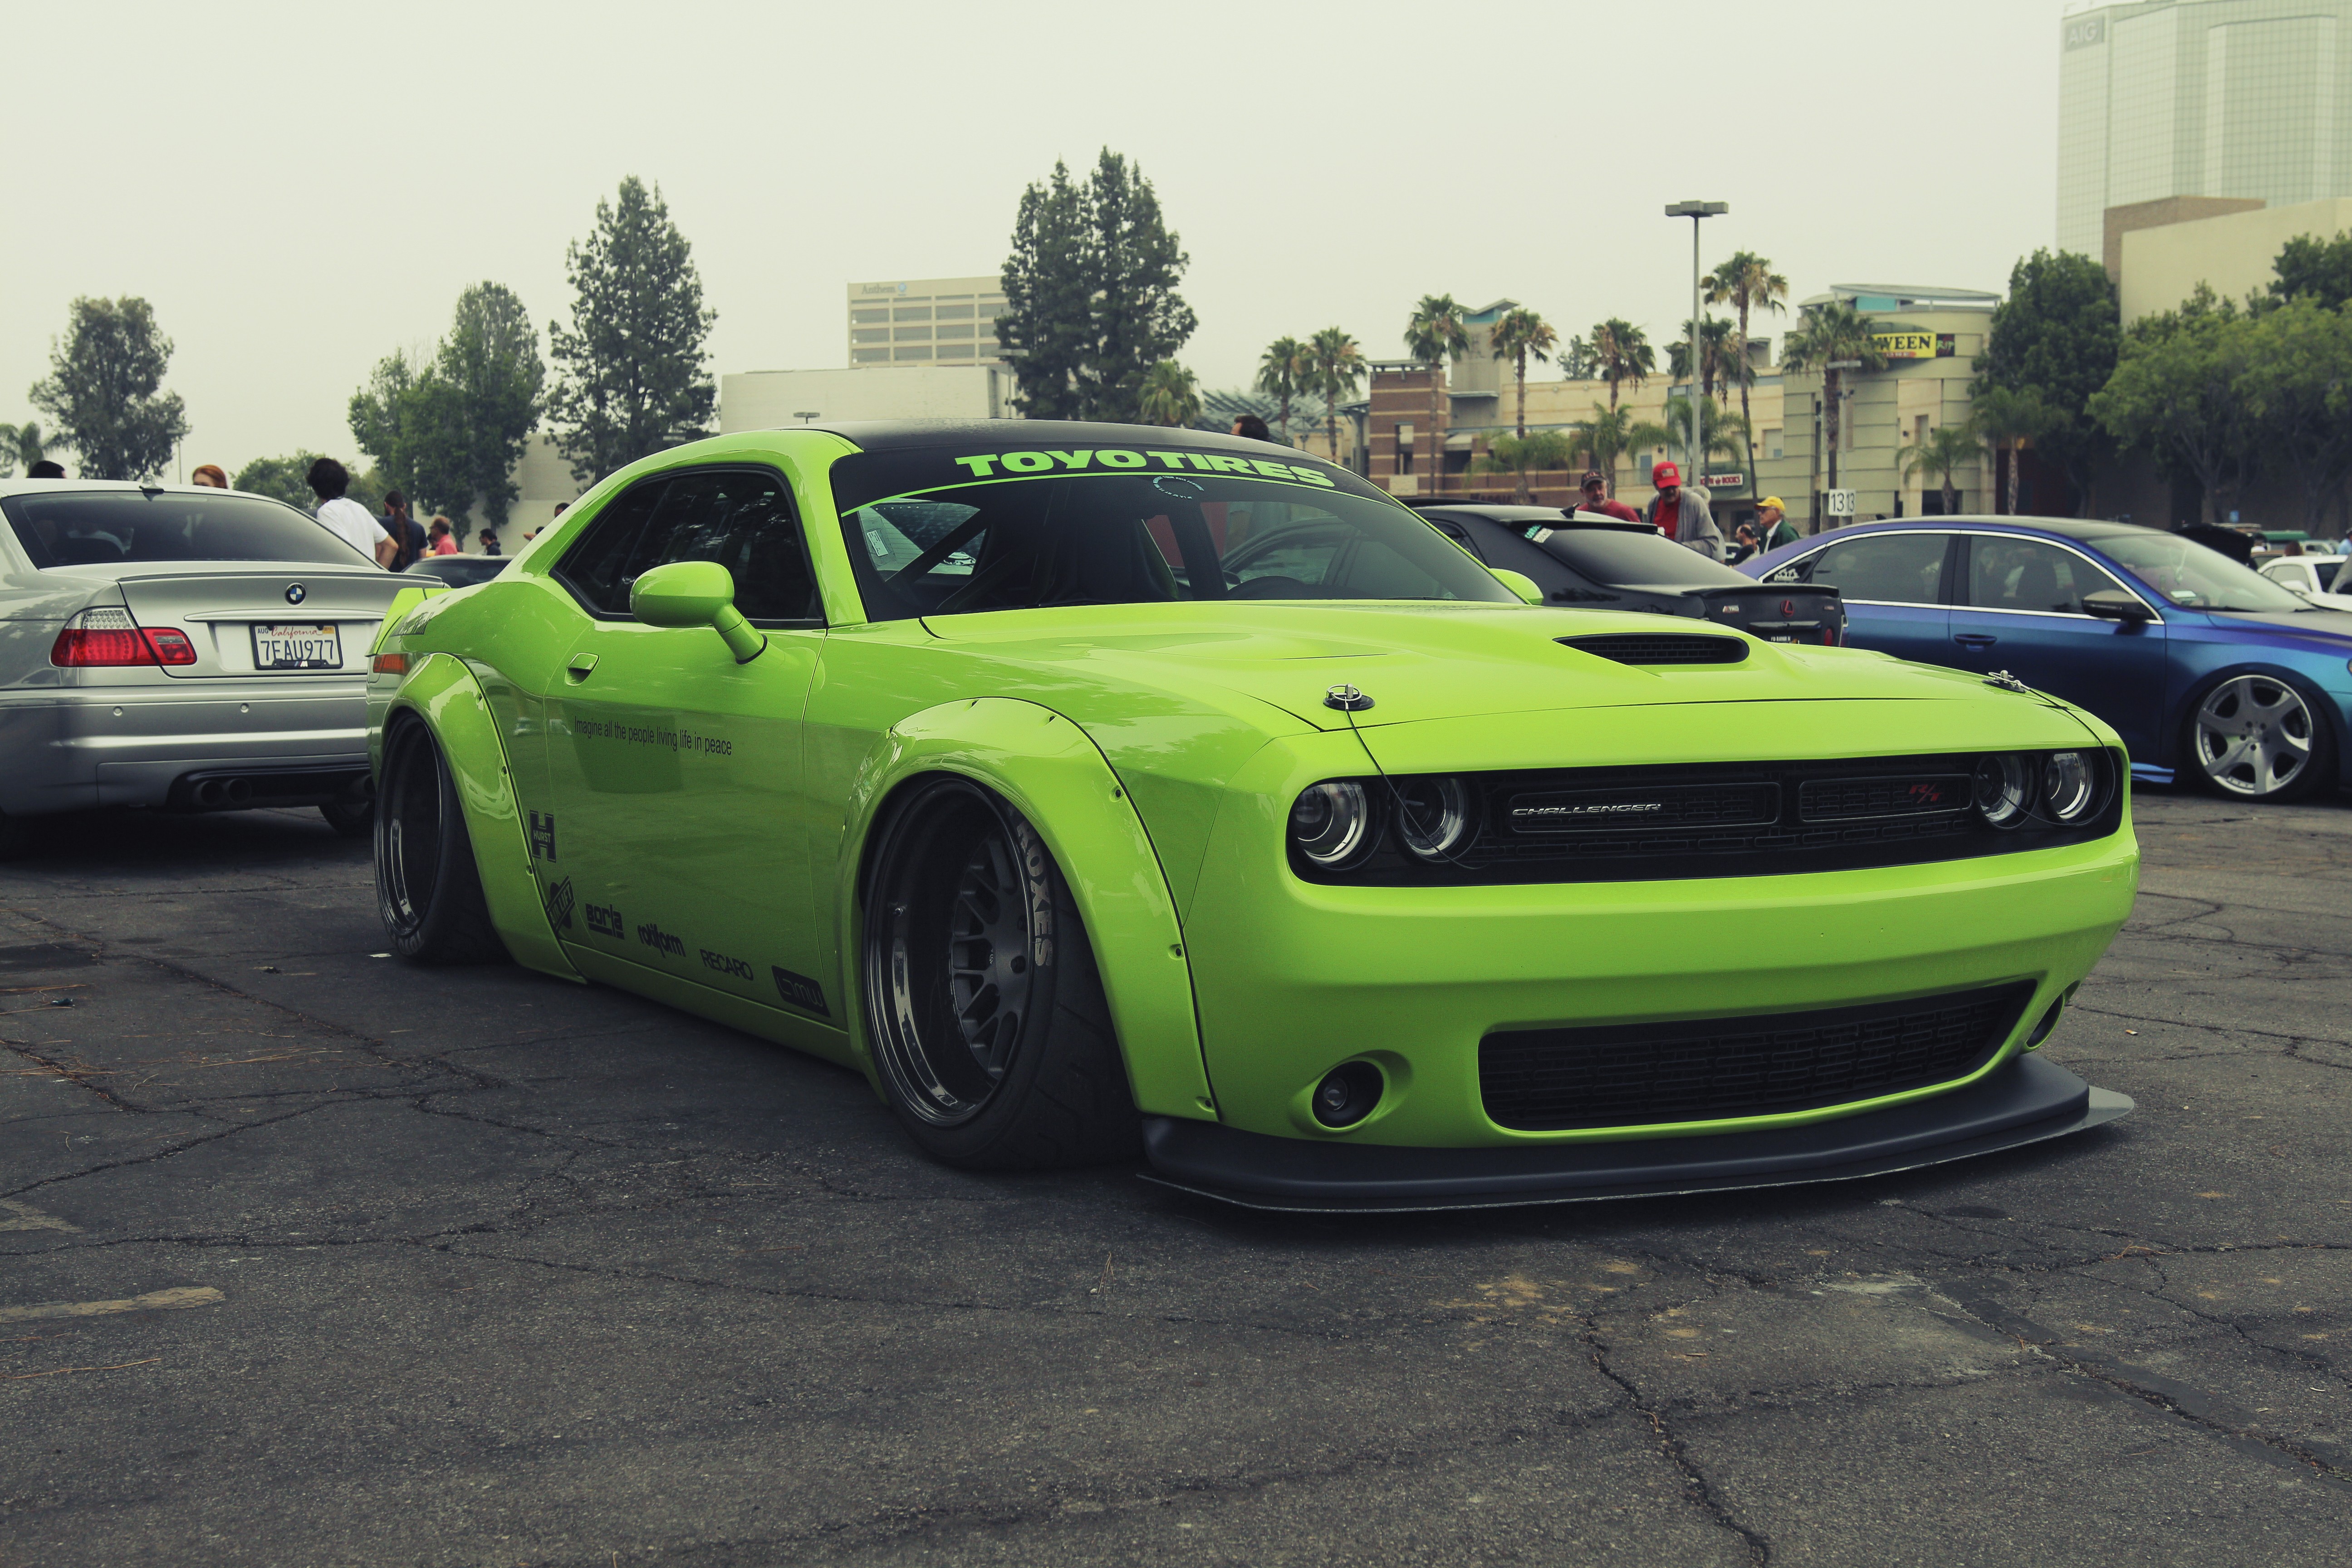 Liberty Walk LB Works Dodge Challenger R T Widebody Green Cars 5184x3456